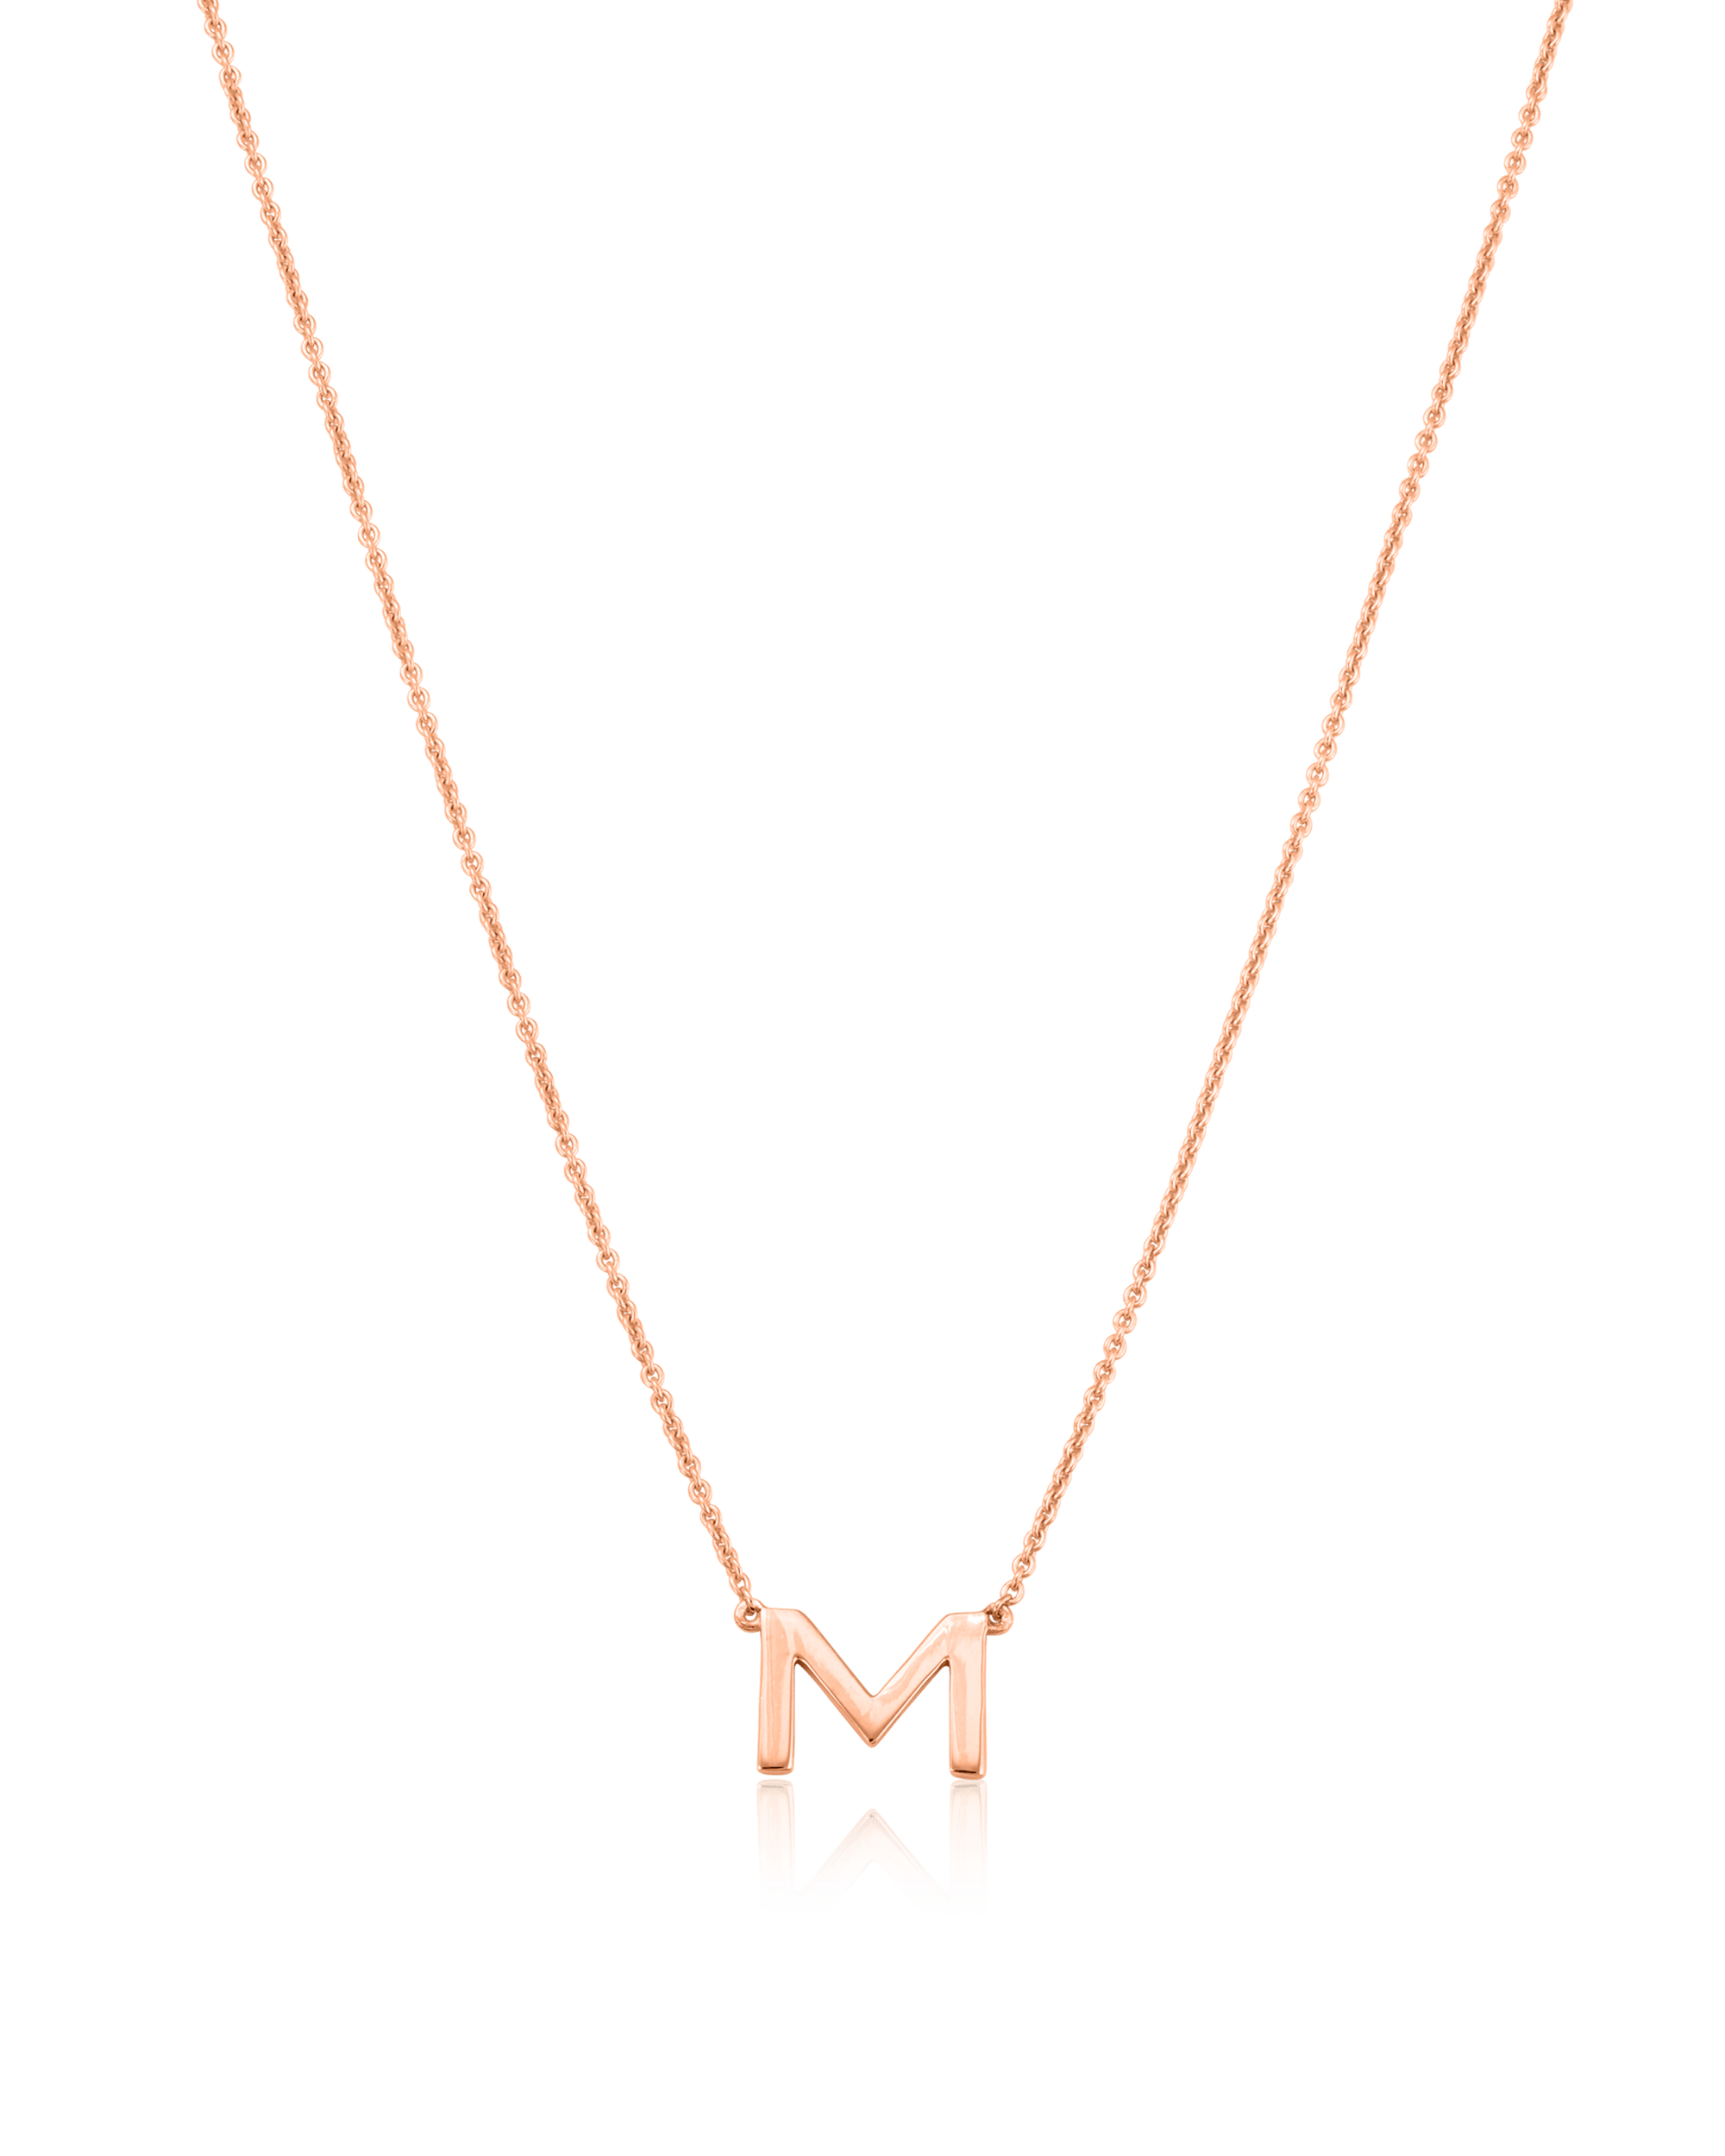 Repurposed authentic engraved LV charm necklace